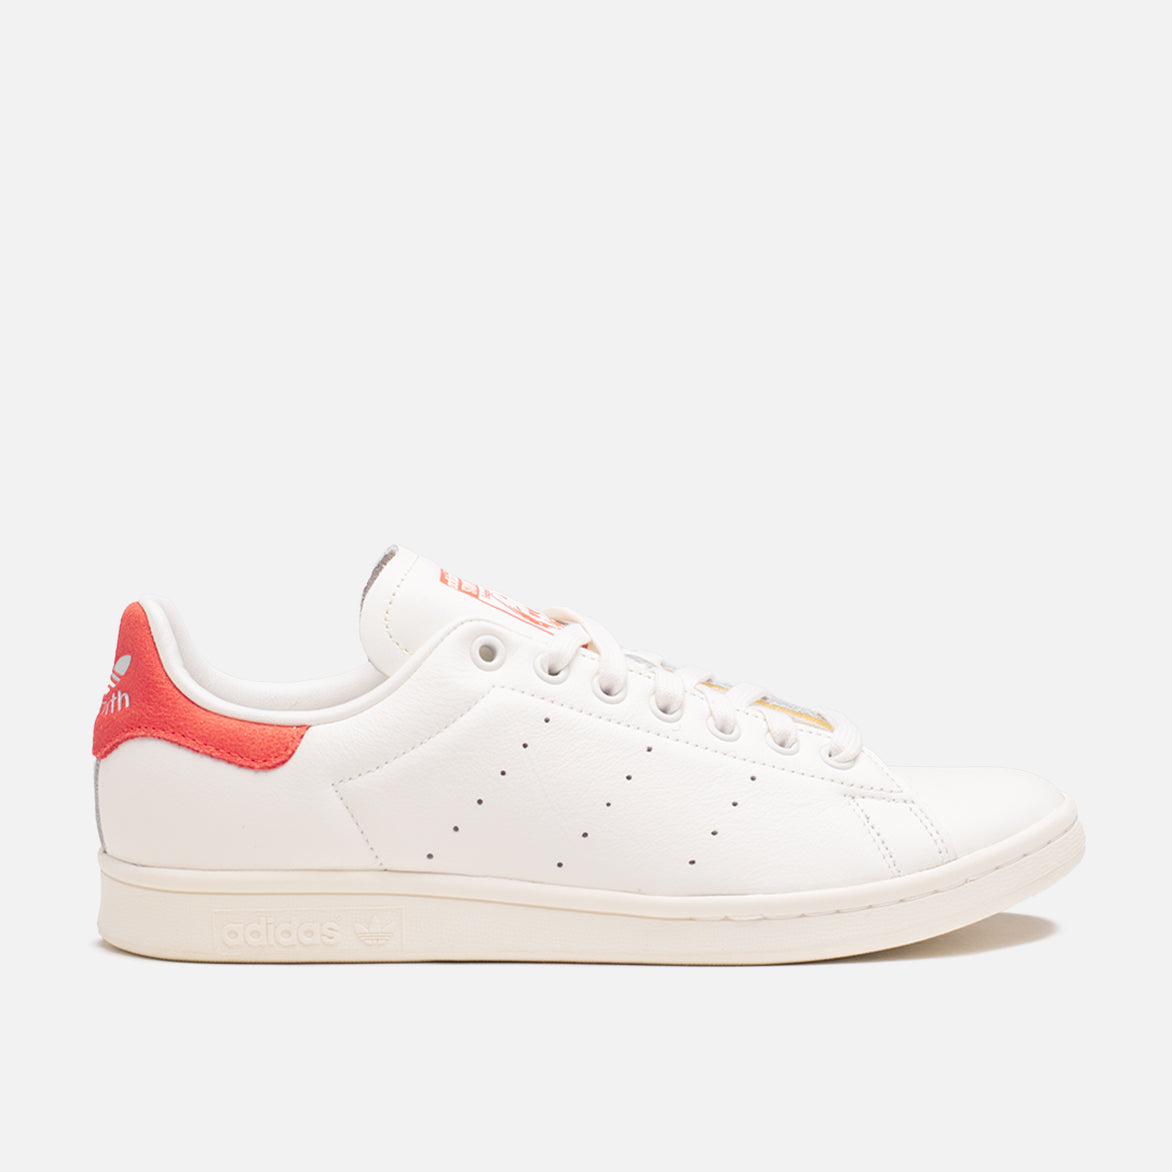 STAN SMITH - WHITE PRELOVED RED | lapstoneandhammer.com